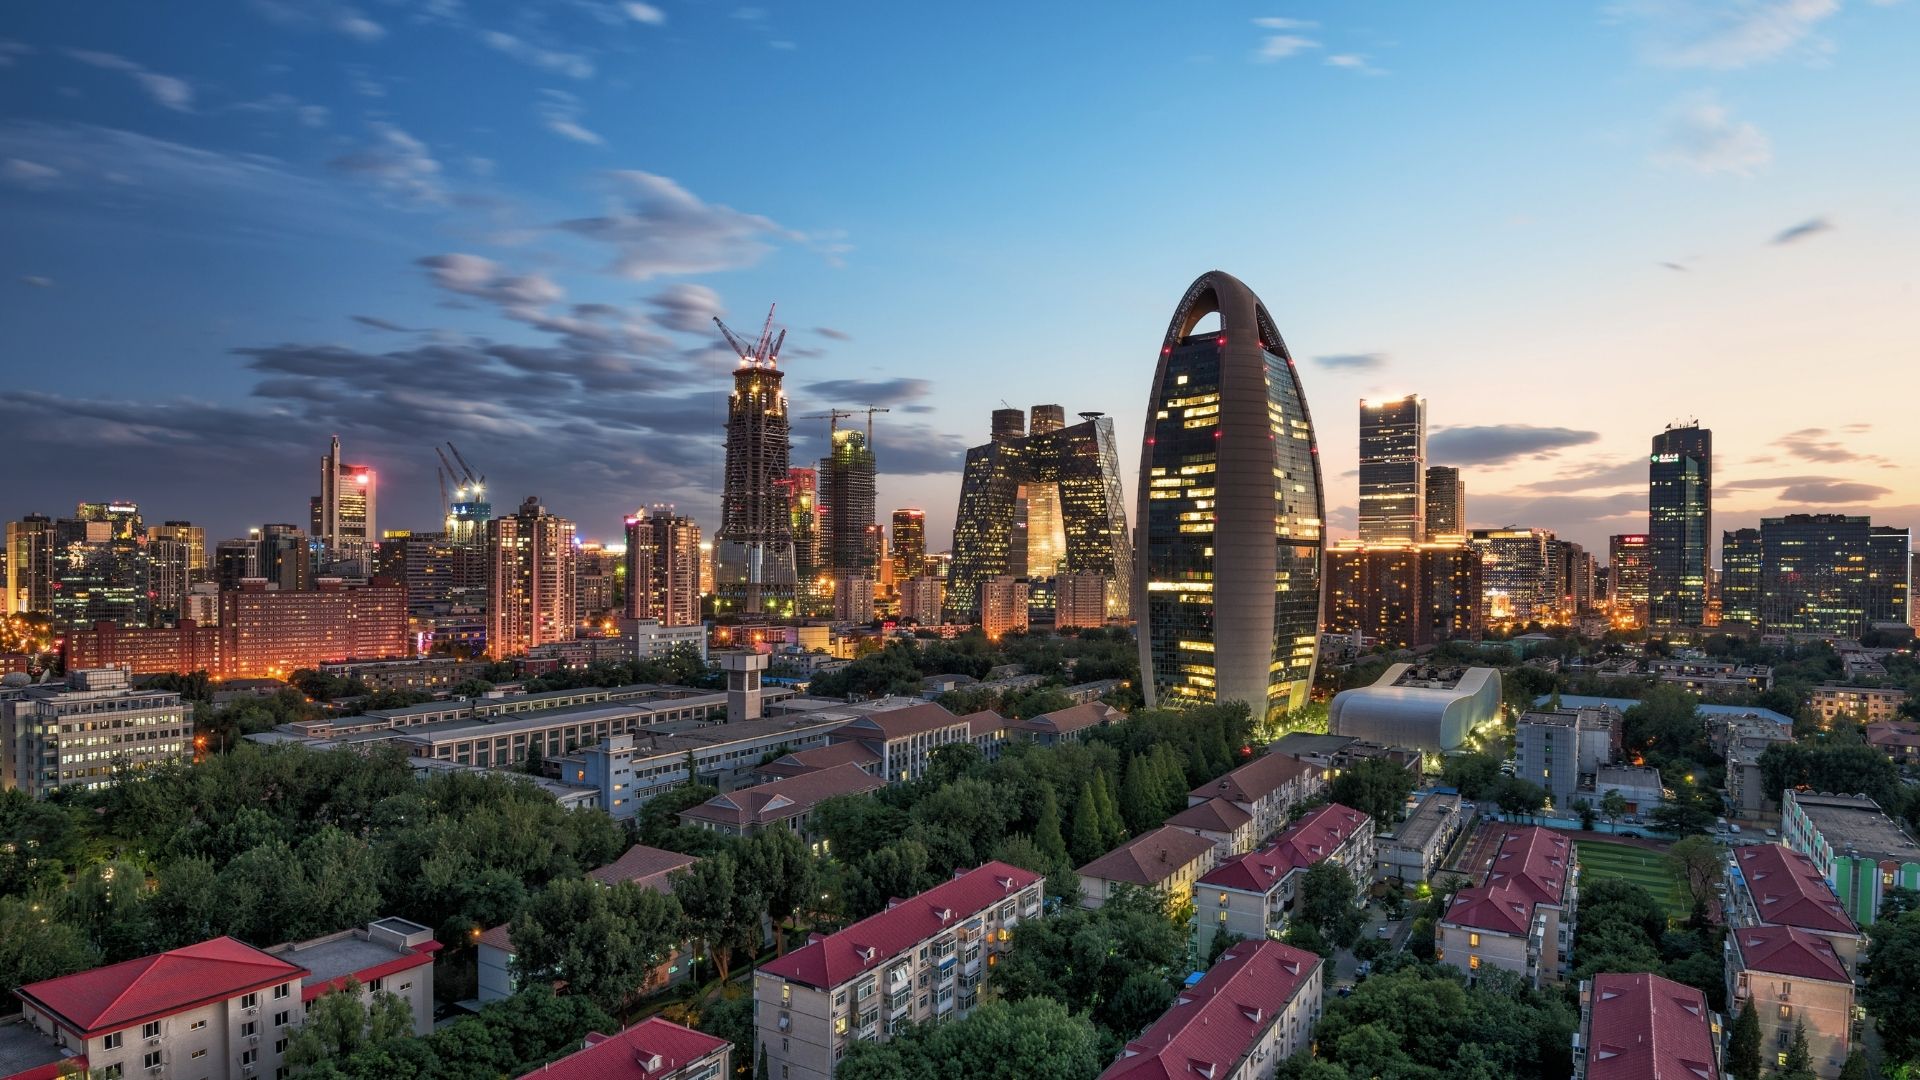 China’s Data Security Law: A New Vision For The Regulation Of A Digital Economy.